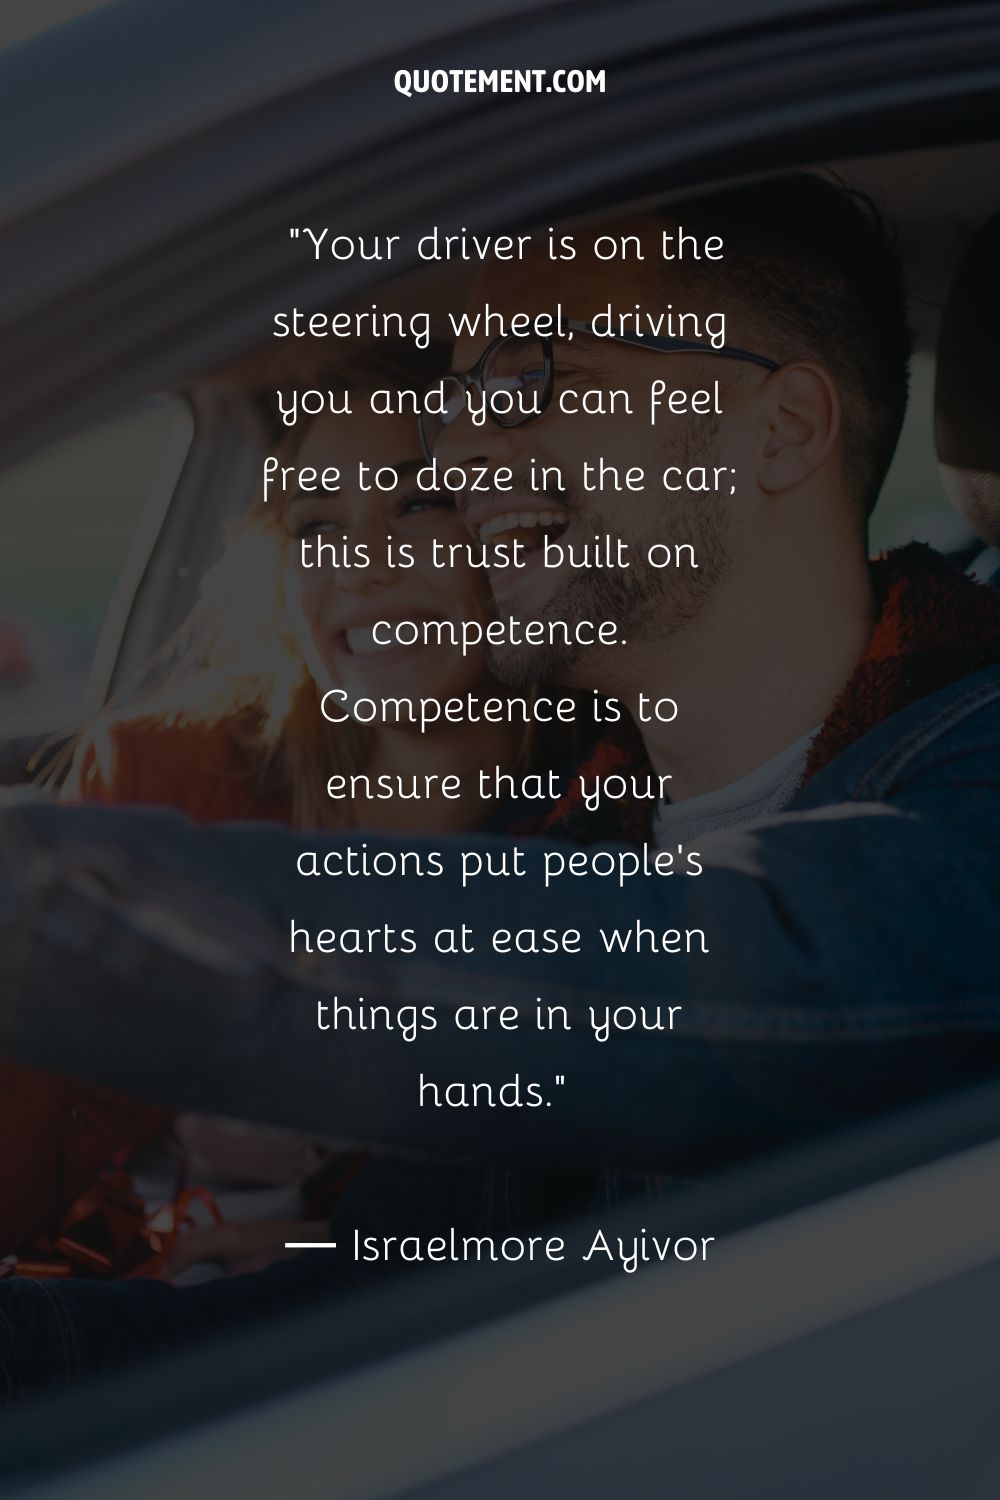 Your driver is on the steering wheel, driving you and you can feel free to doze in the car; this is trust built on competence. Competence is to ensure that your actions put people's hearts at ease when things are in your hands